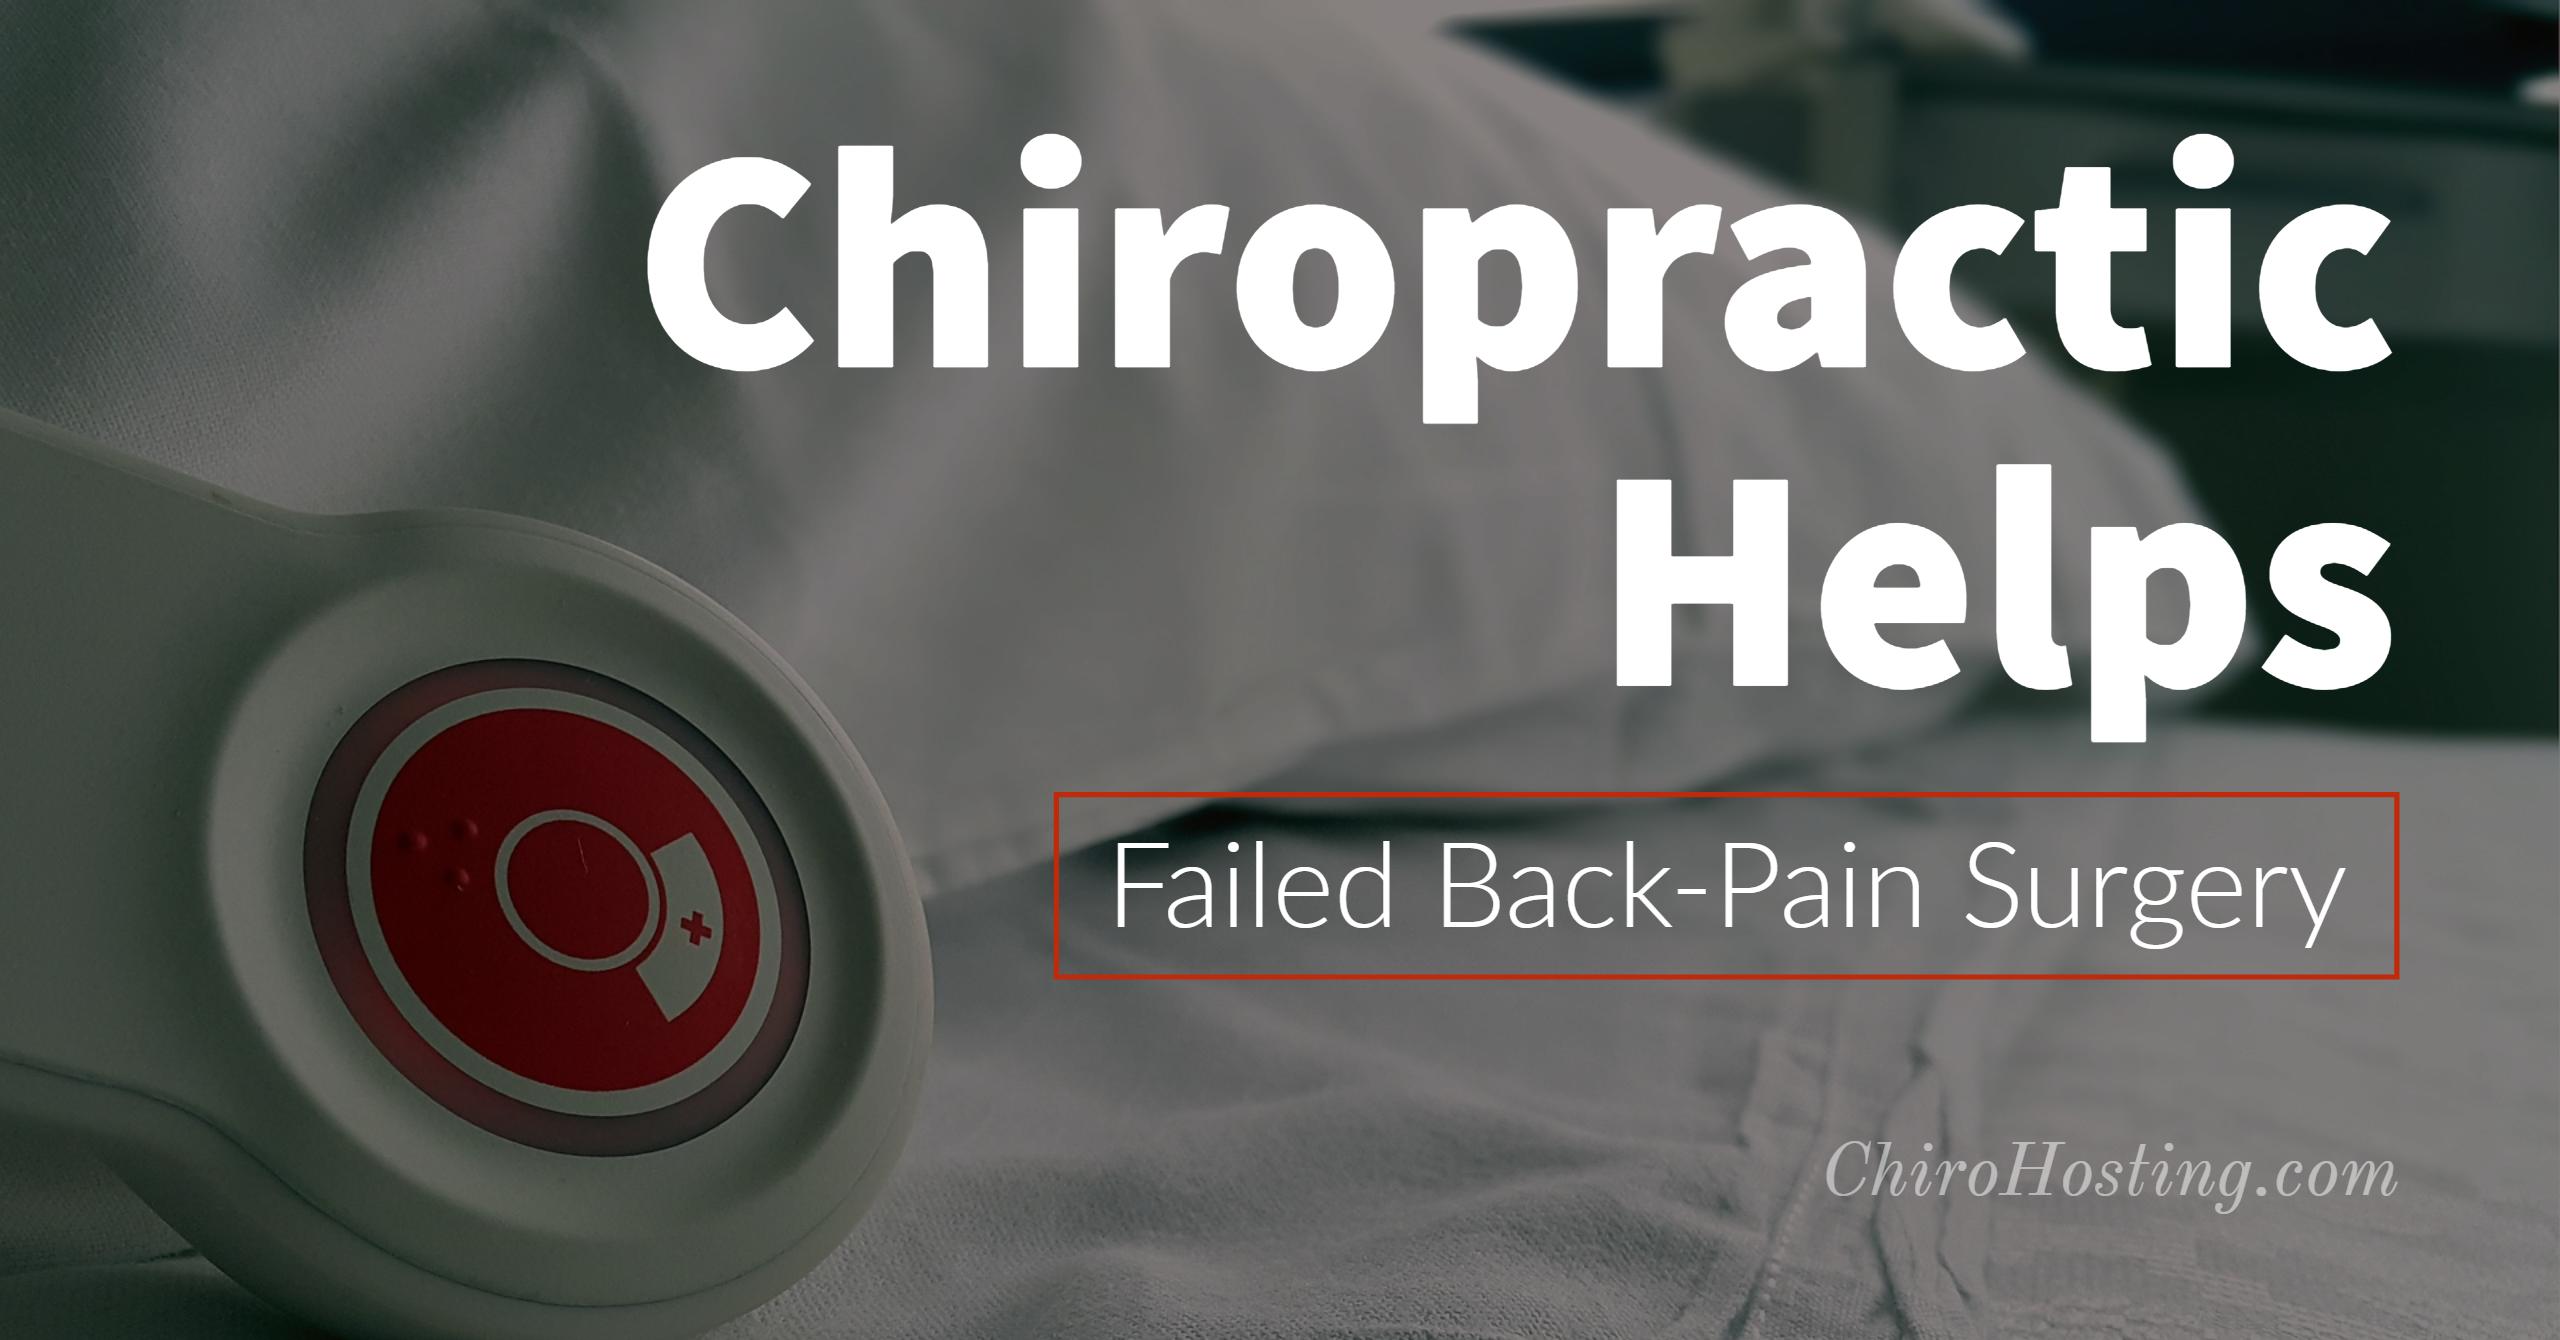 Chiropractic Helps Patients Recover from Failed Back-Pain Surgery